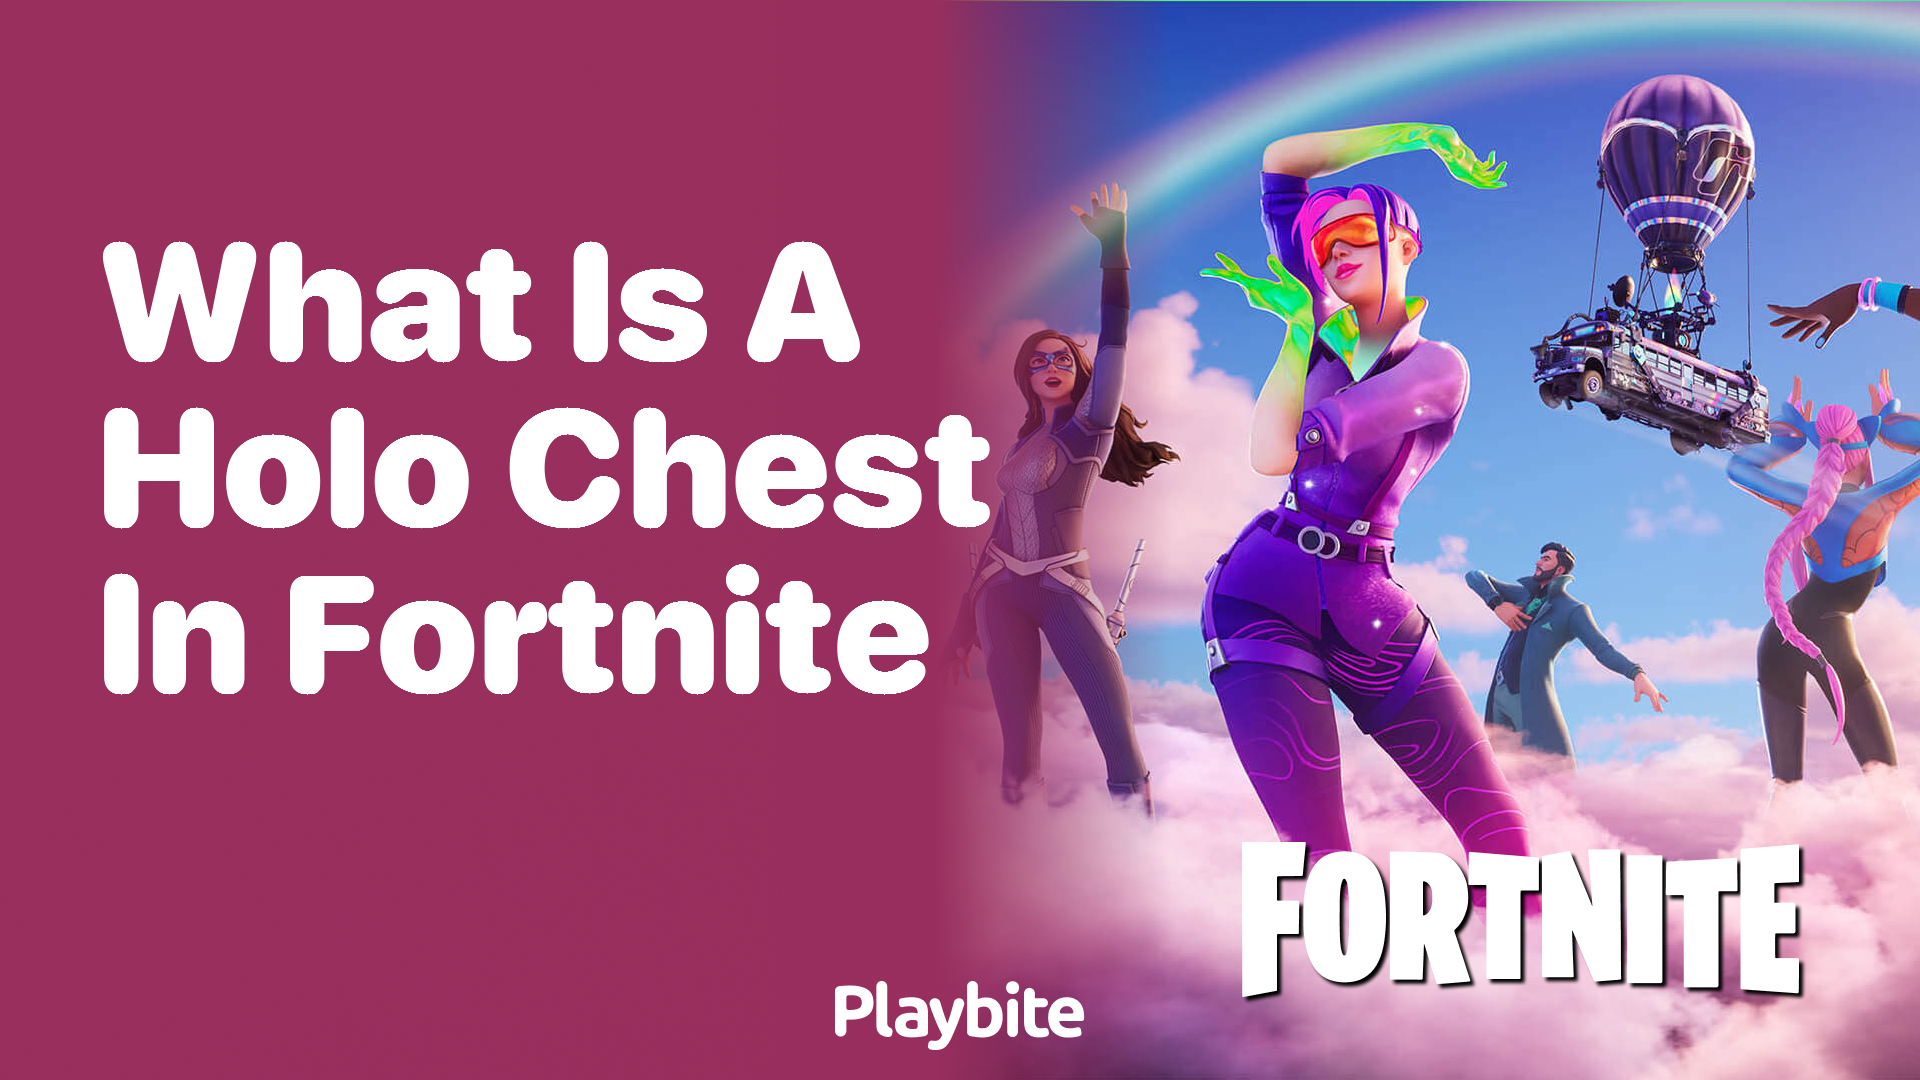 What Is a Holo Chest in Fortnite?